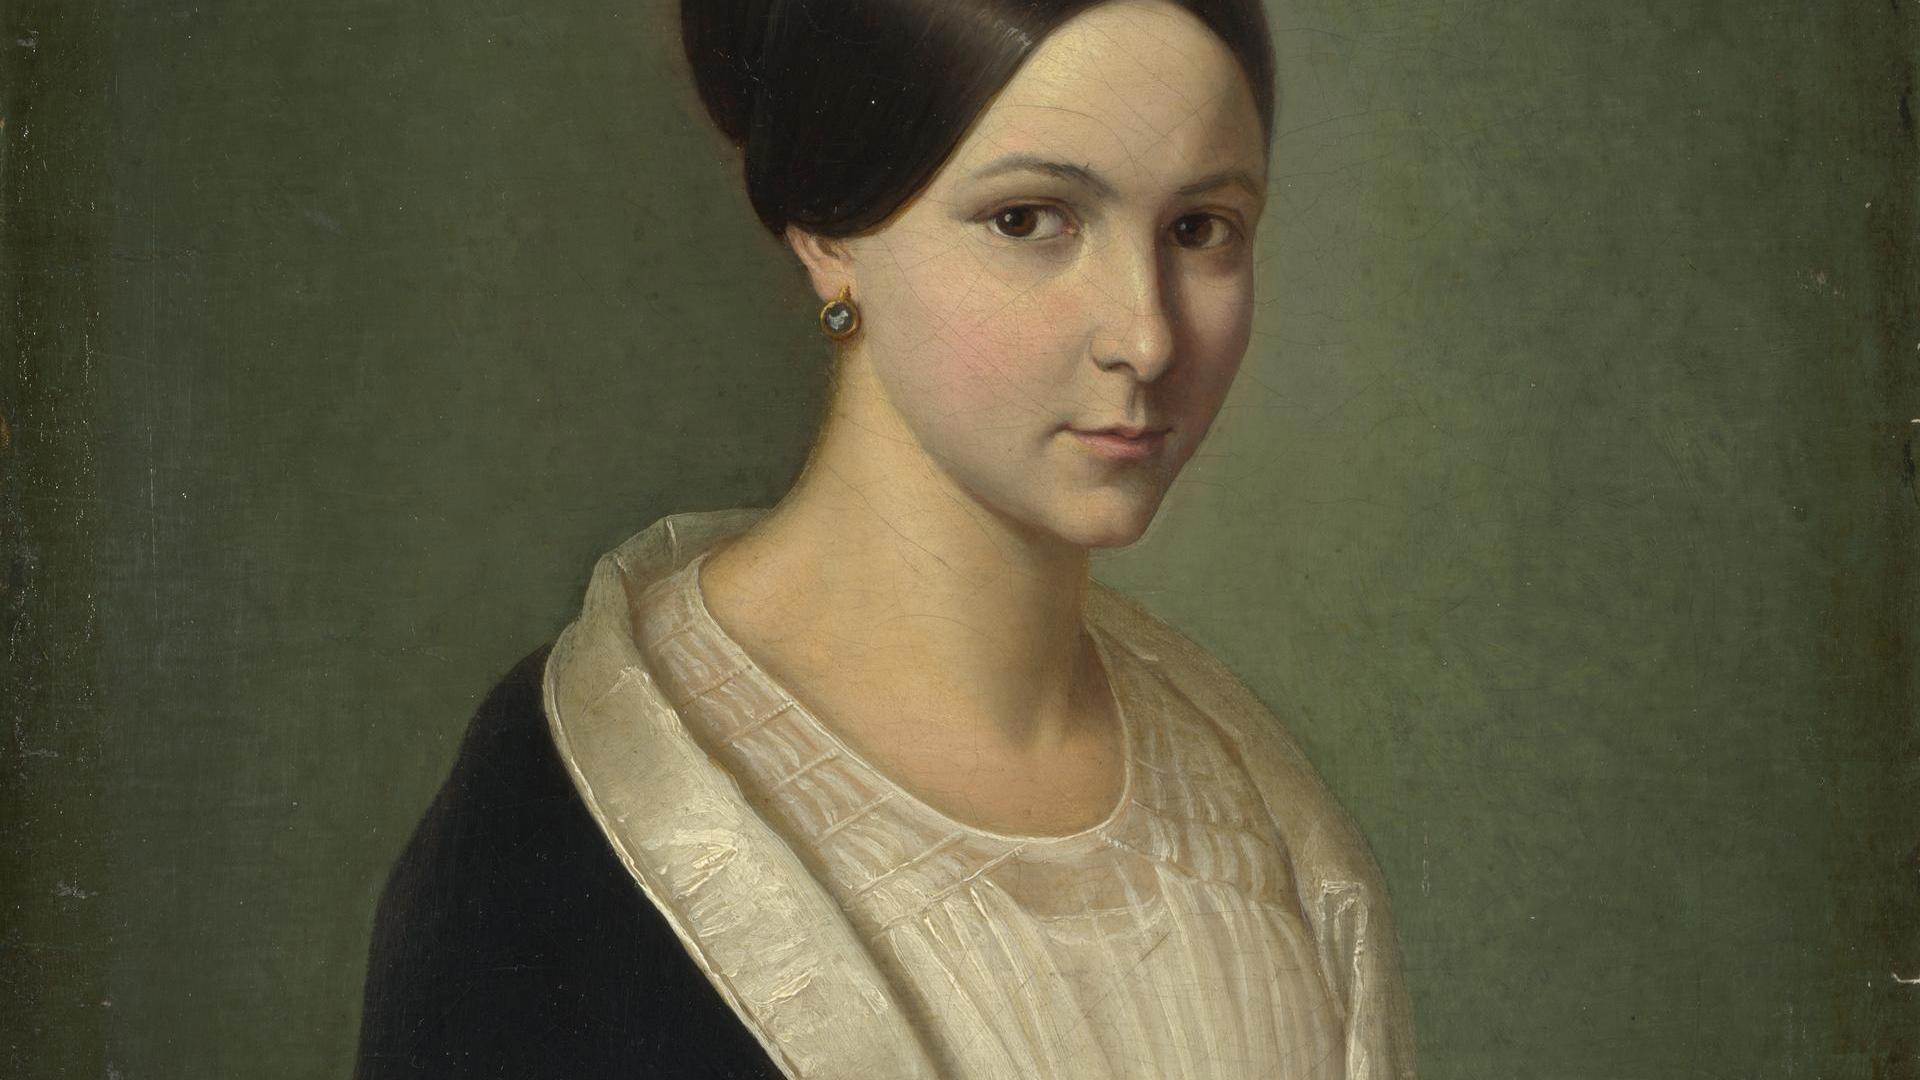 Portrait of a Lady by French